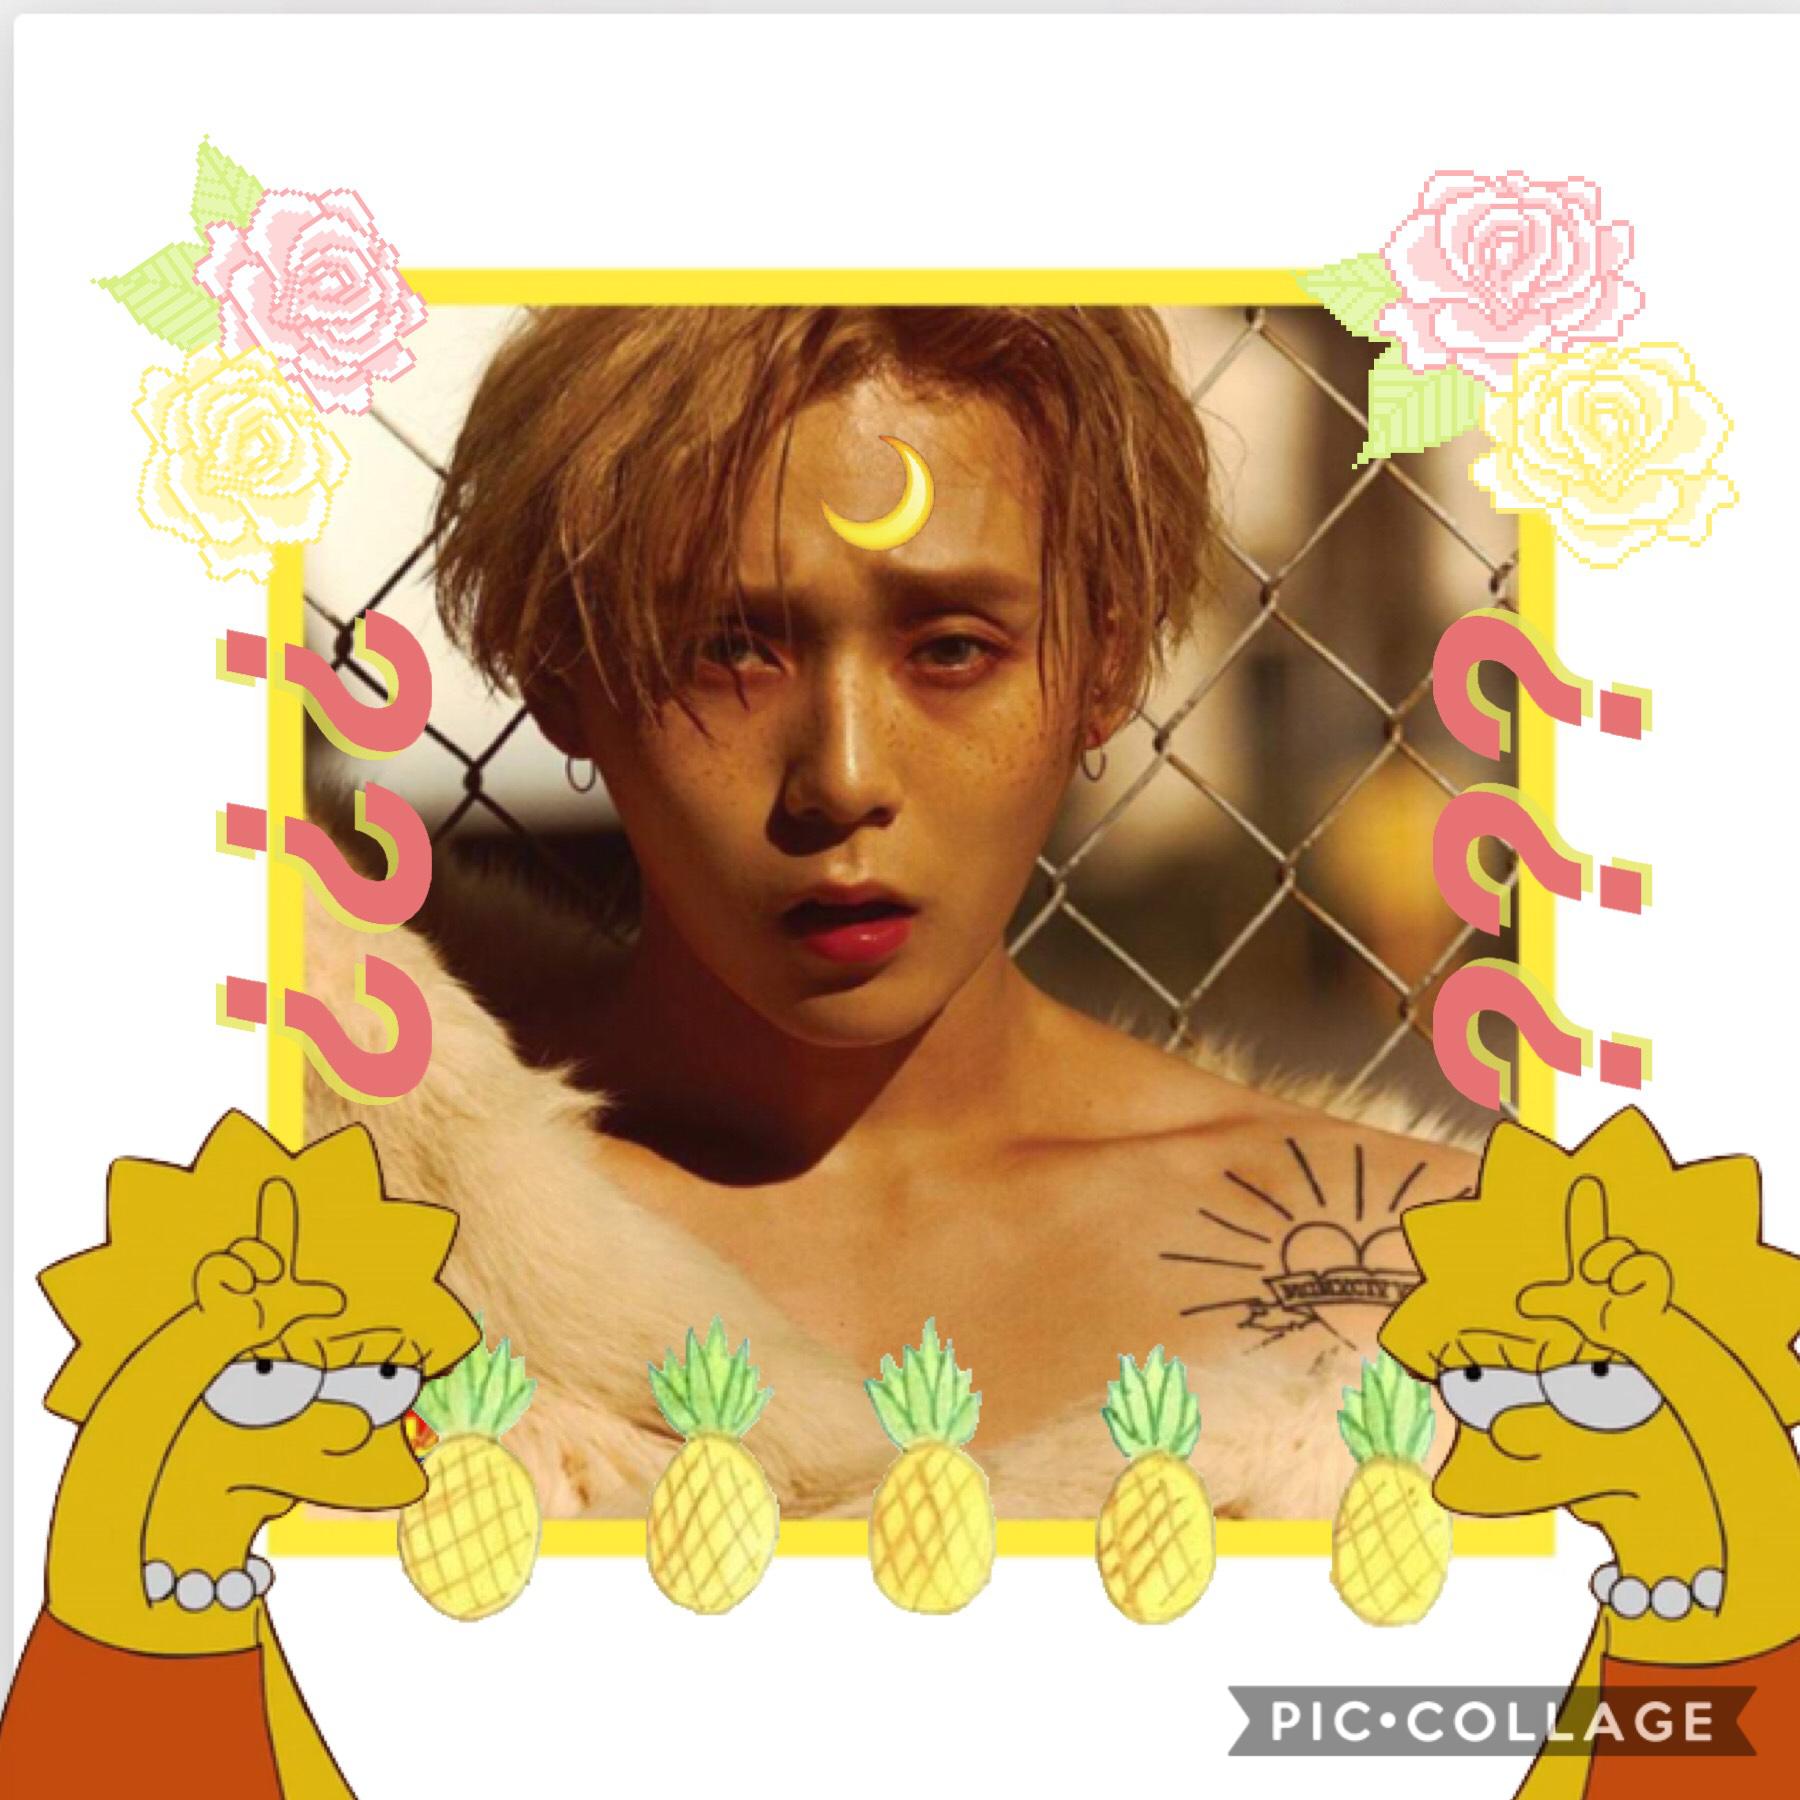 💫tap💫
and thats all folks !! ending it with hyojong ( e'dawn ) my baby so stan triple h aka bi poly legends dont over sexualize hyuna and donr make addict jokes abt hyojong thank you :) THEIR COMEBACK!!!